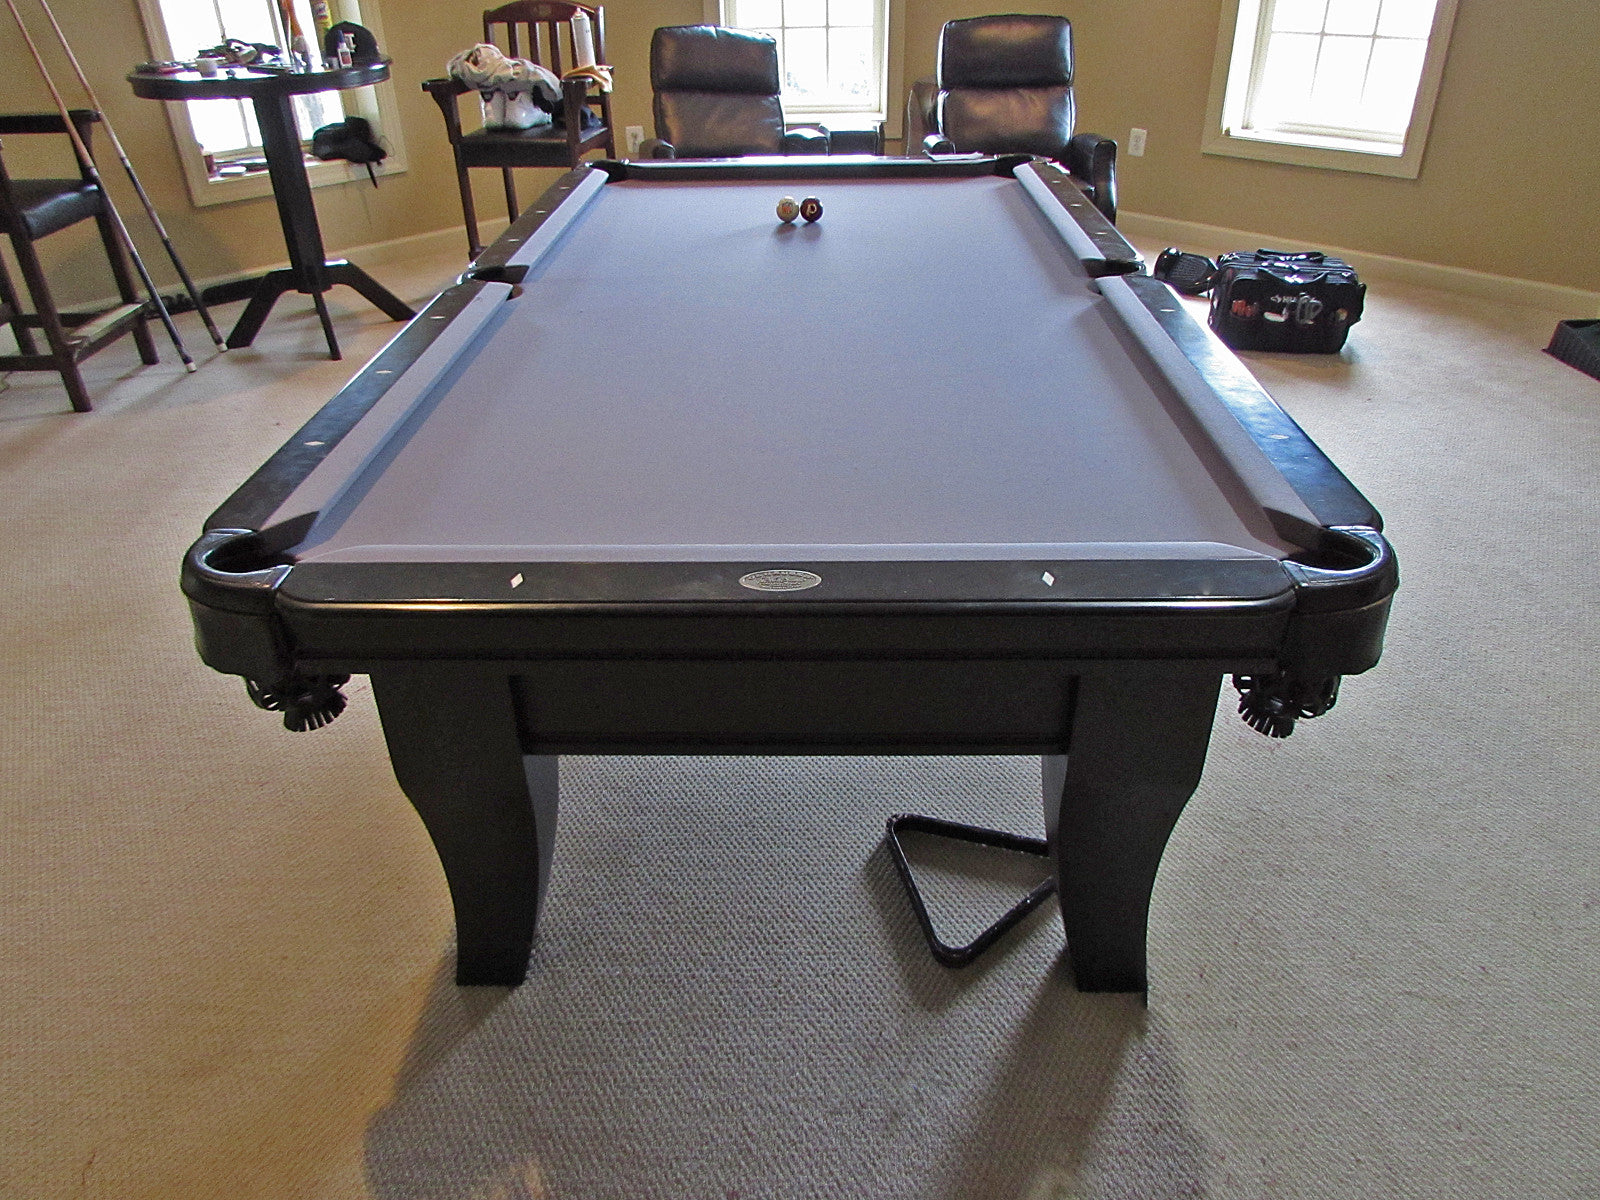 Olhausen Chicago Pool Table in Great Falls Virginia